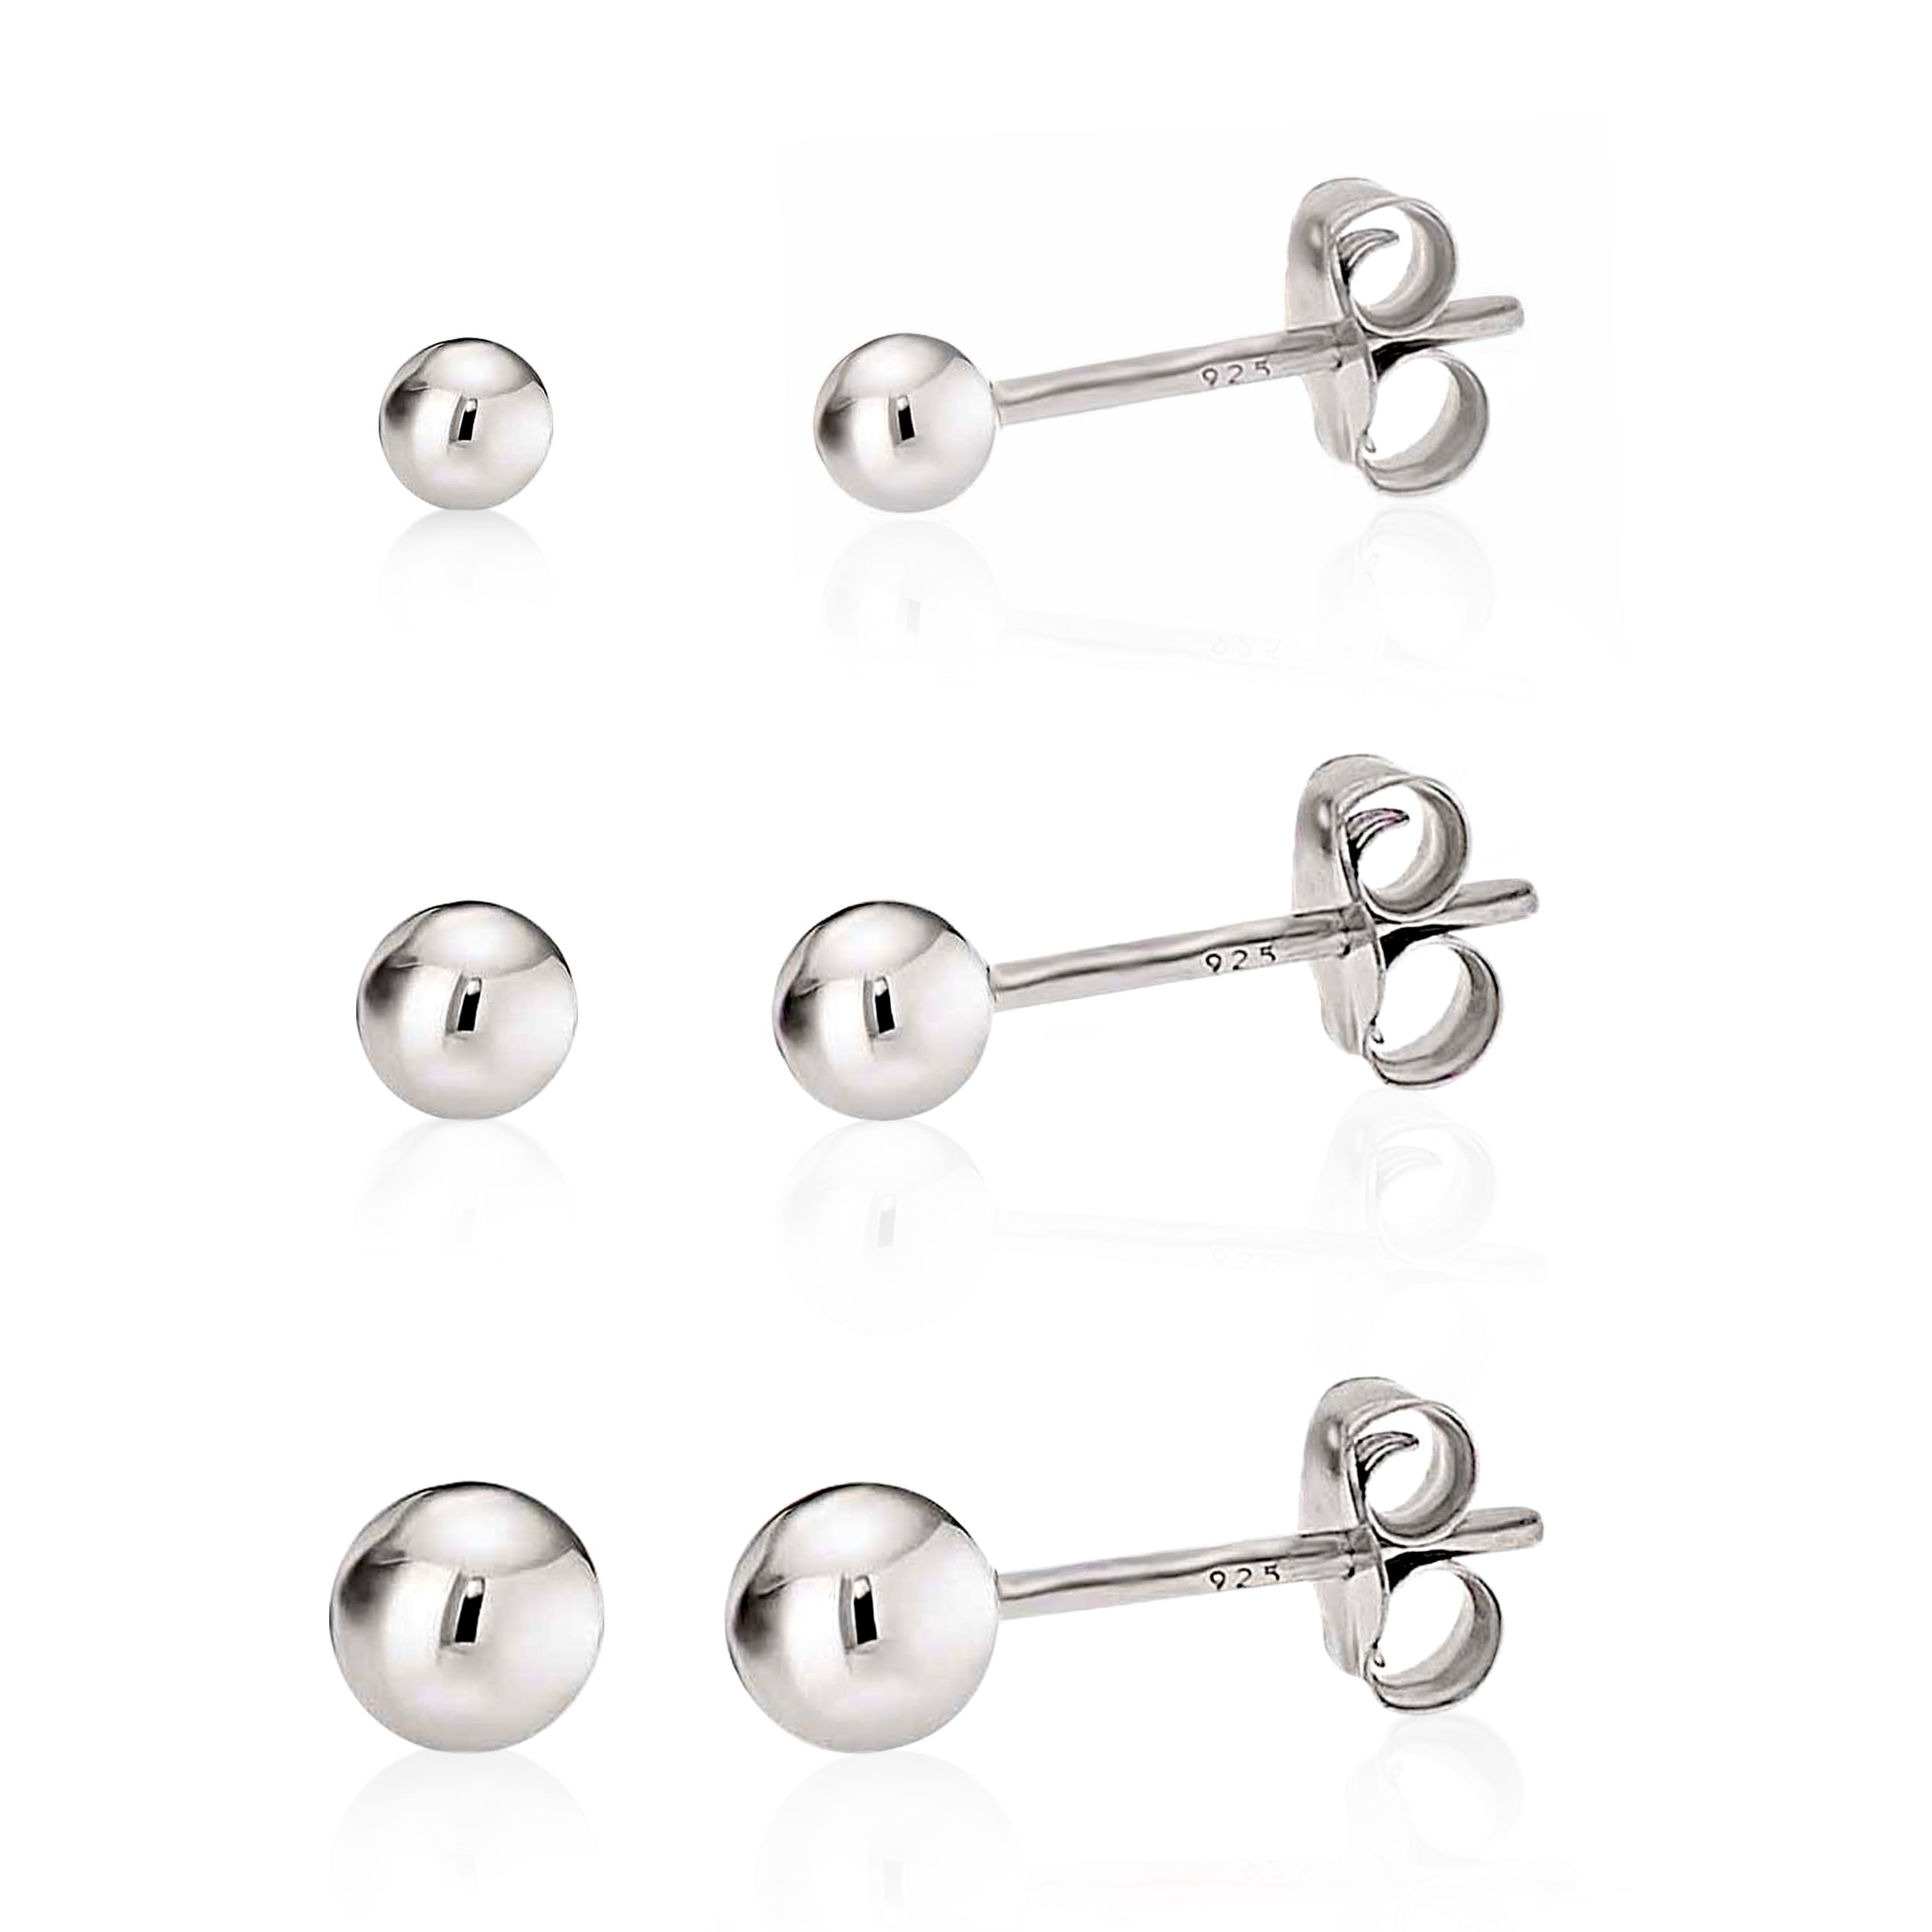 1 x Sterling 925 Silver Round Plain Ball Stud Earrings Choice of 3mm 4mm 5mm 6mm 